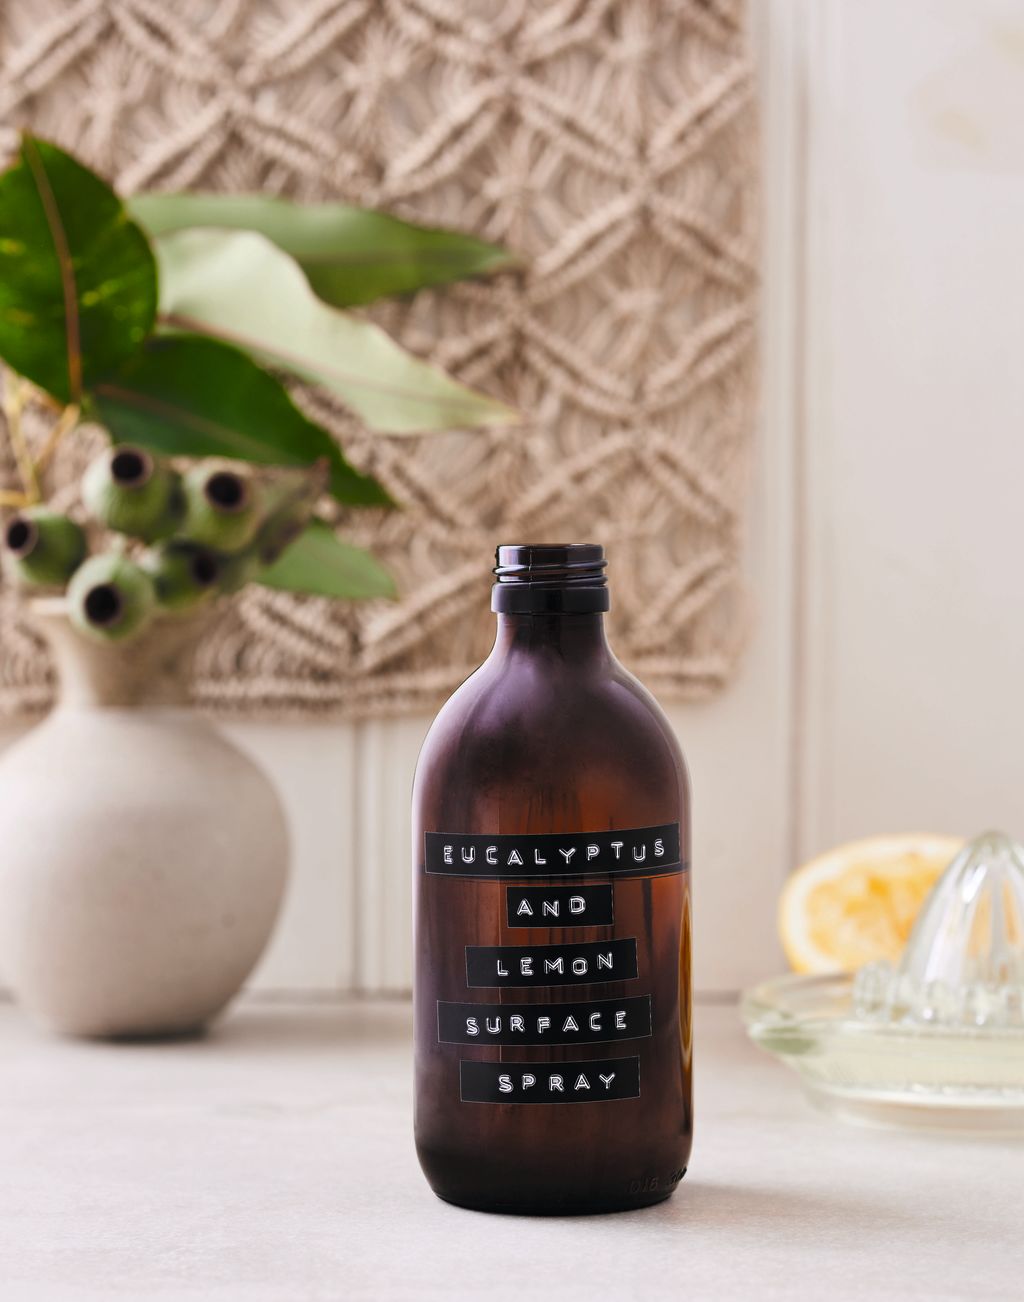 Eucalyptus and lemon surface spray from Home by Natural Harry by Harriet Birrell. Photo: Nikole Ramsay.